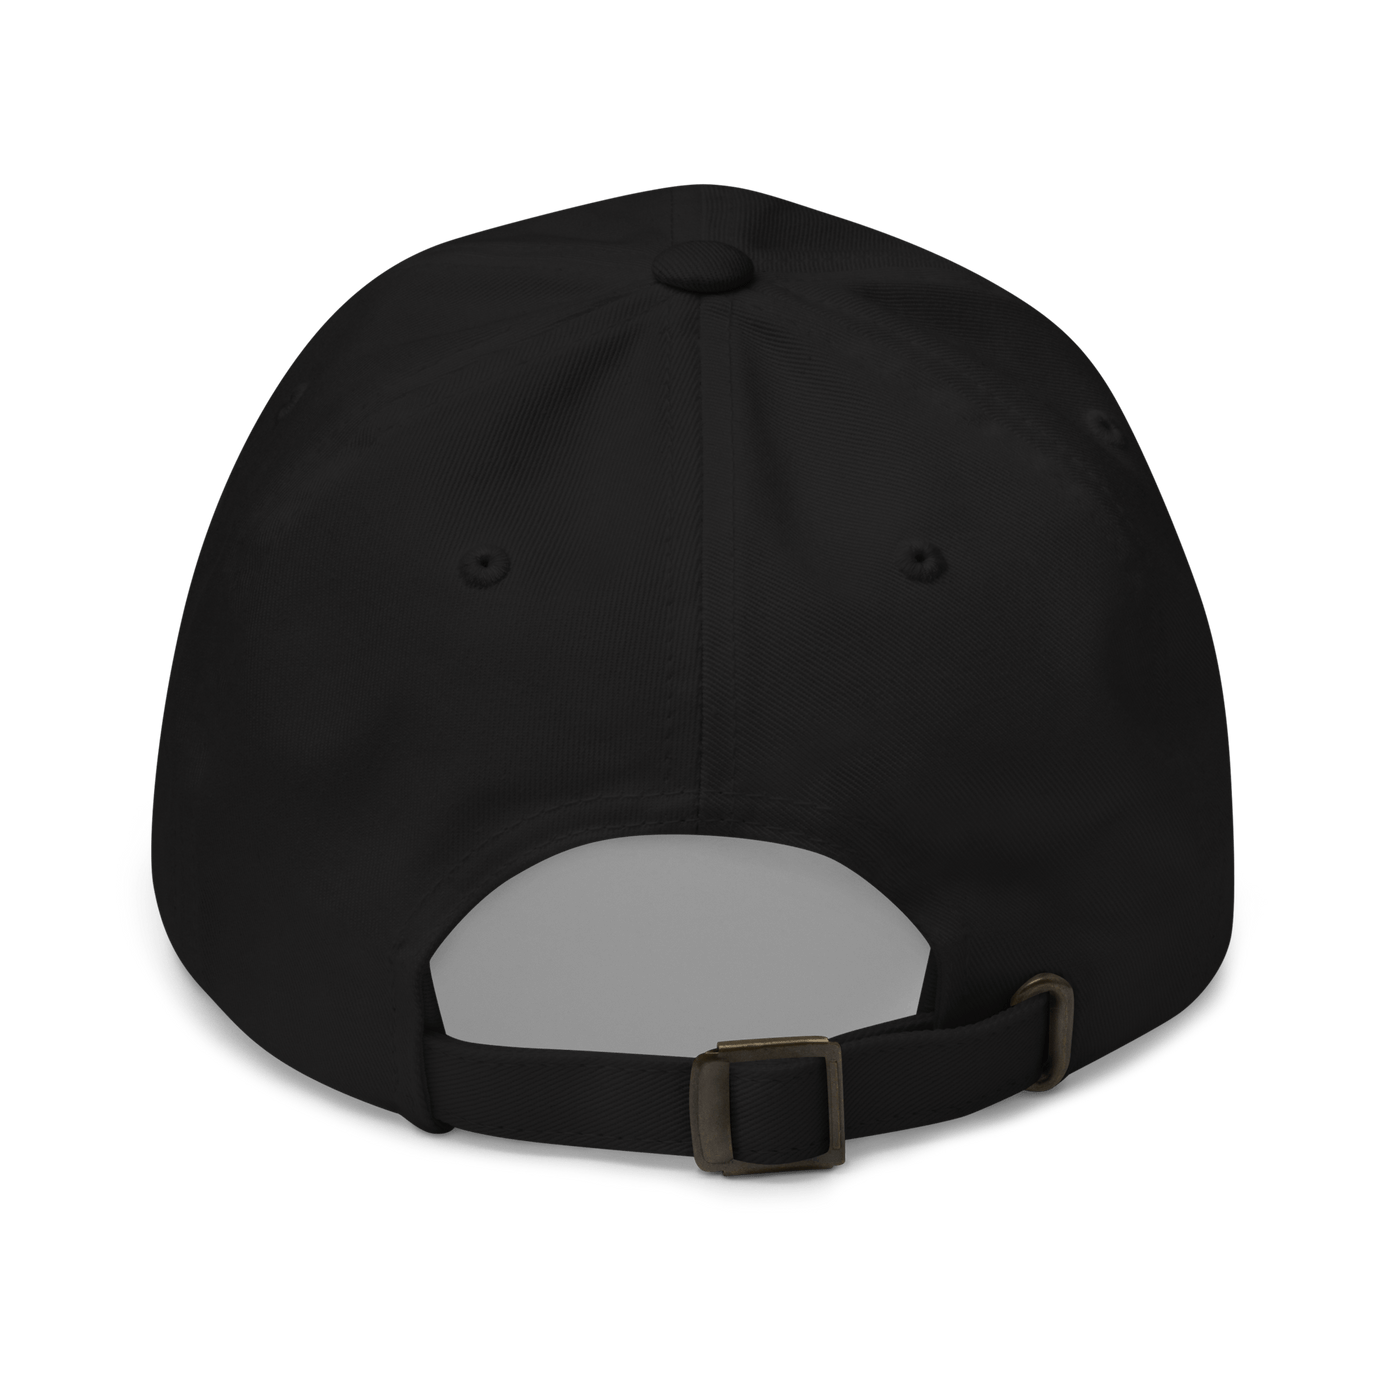 Stockholm Syndrome Dad hat - Black - - Just Another Cap Store